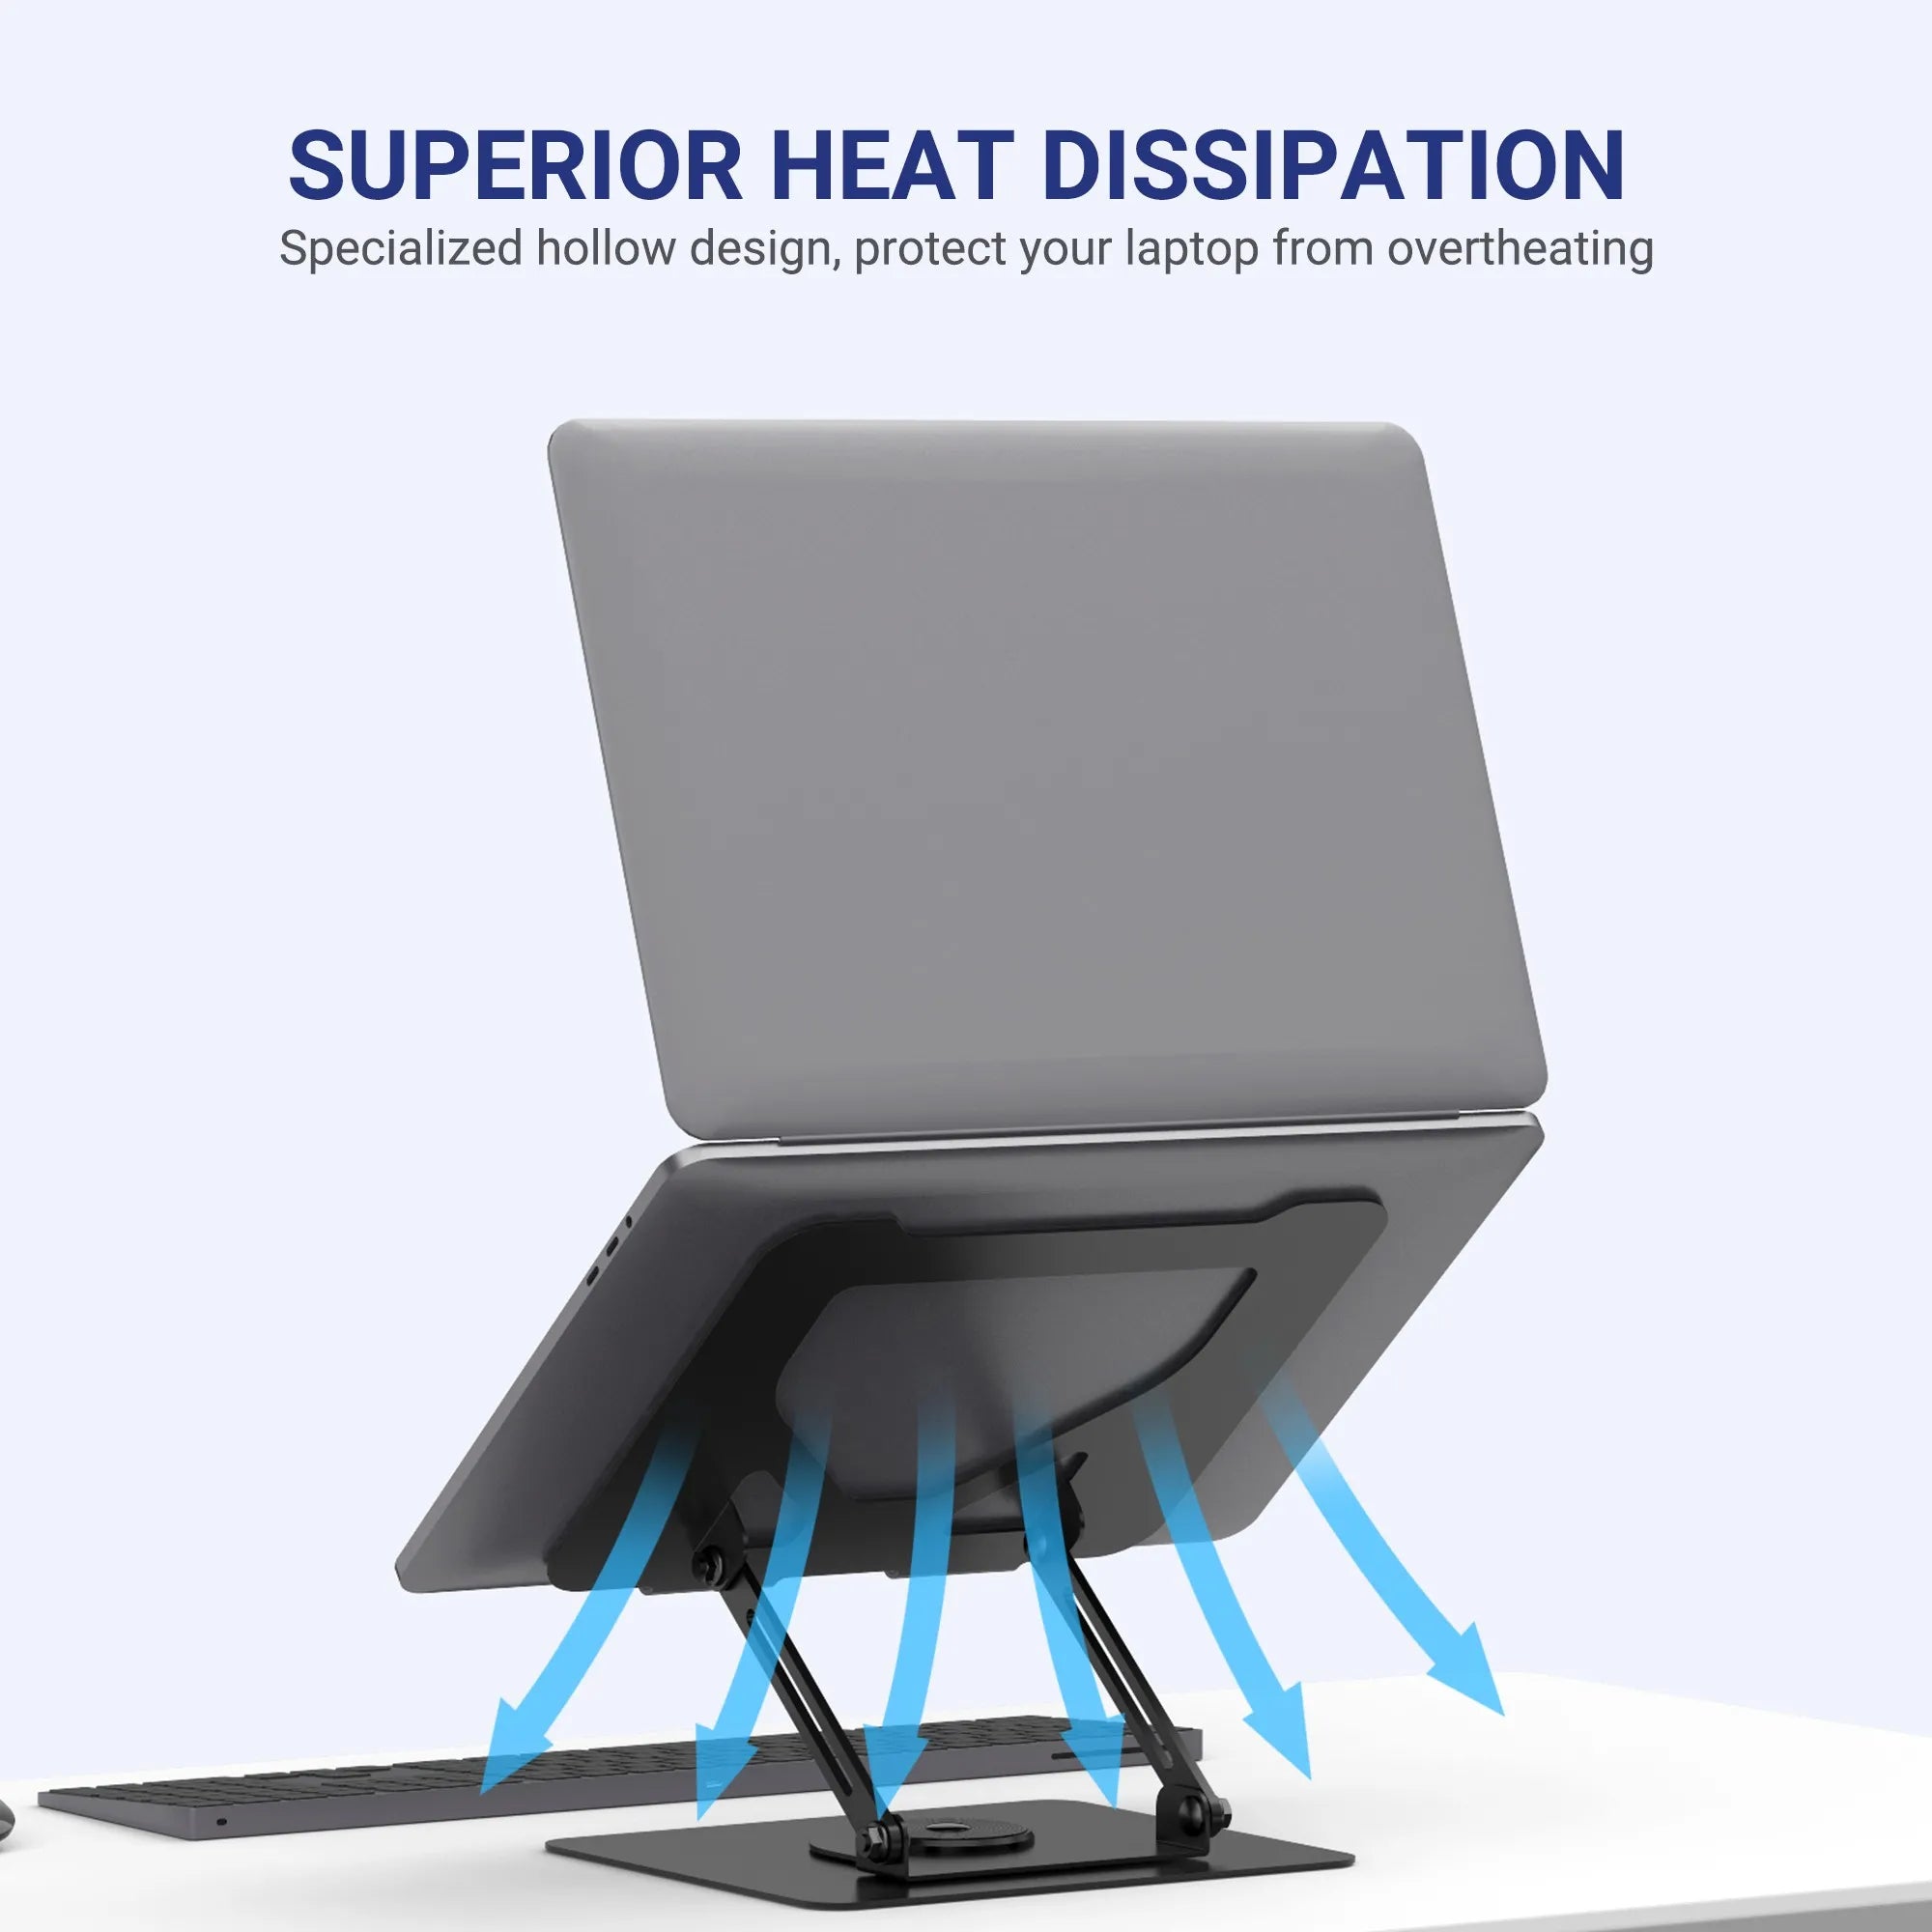 Ergonomic laptop stand with superior heat dissipation feature for cooling, ideal for desk setups in Singapore.